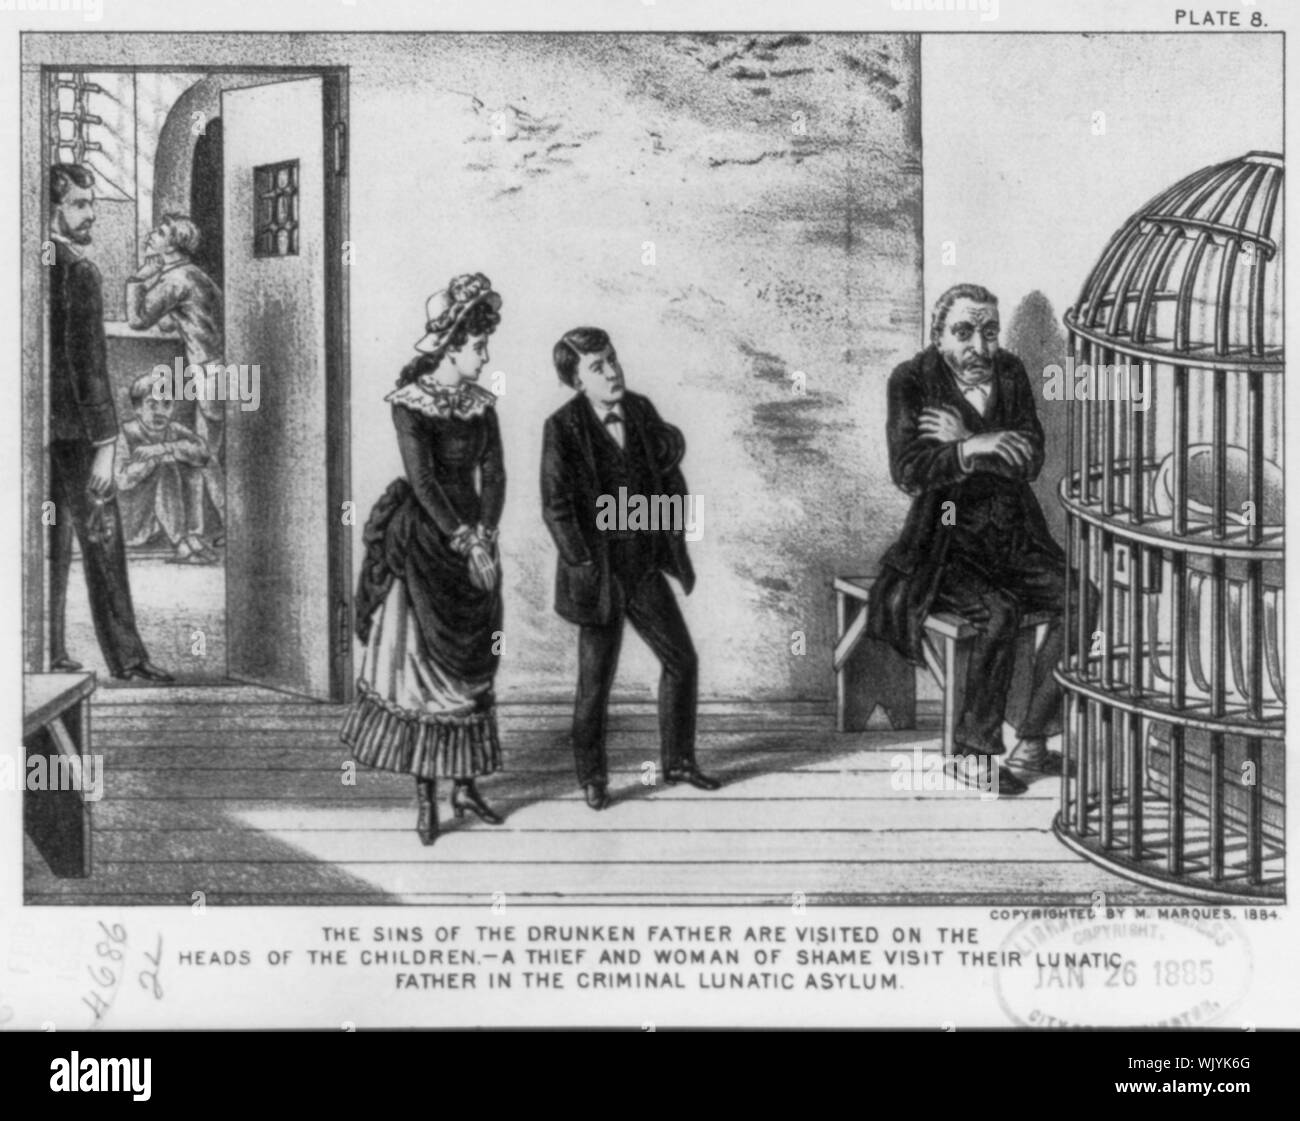 Illustration of the dangers of alcoholic beverages: The sins of the drunken father are visited on the heads of the children - a thief and woman of shame visit their lunatic father in the criminal lunatic asylum, pl. 8 Stock Photo